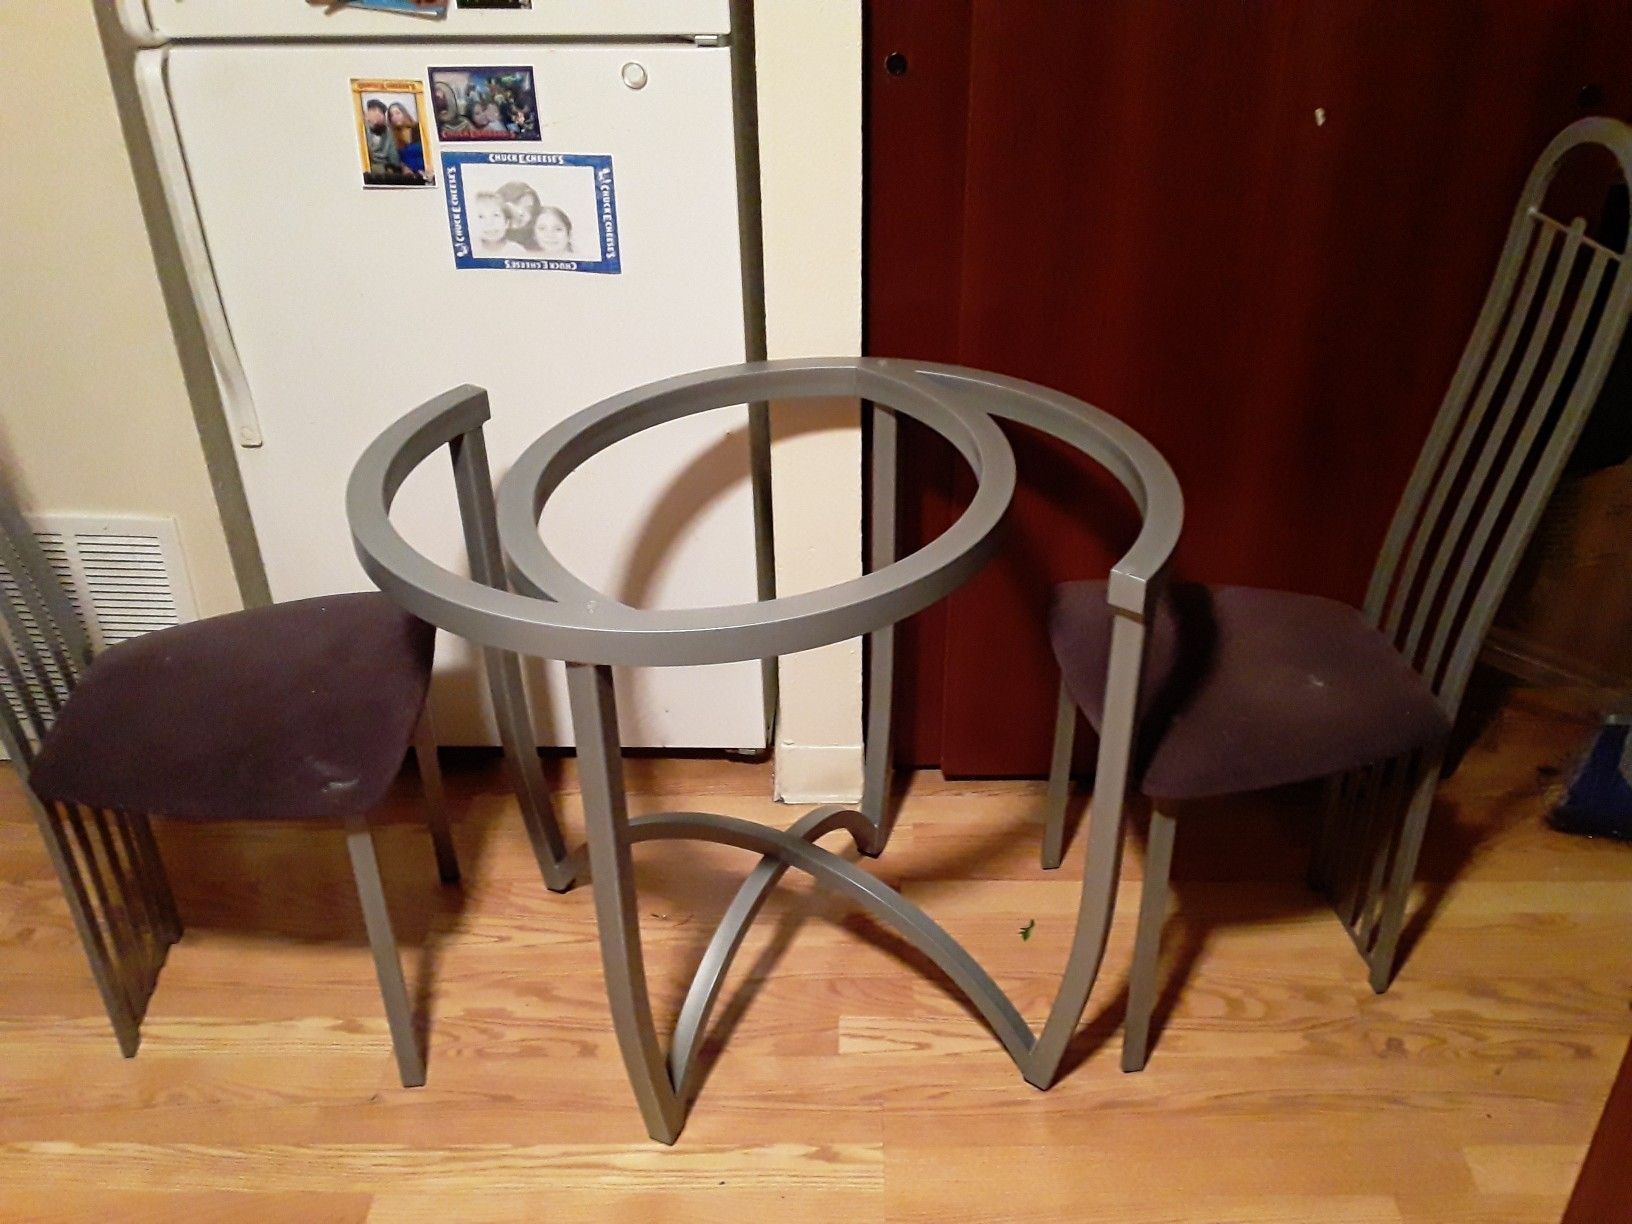 Metal table base and two chairs